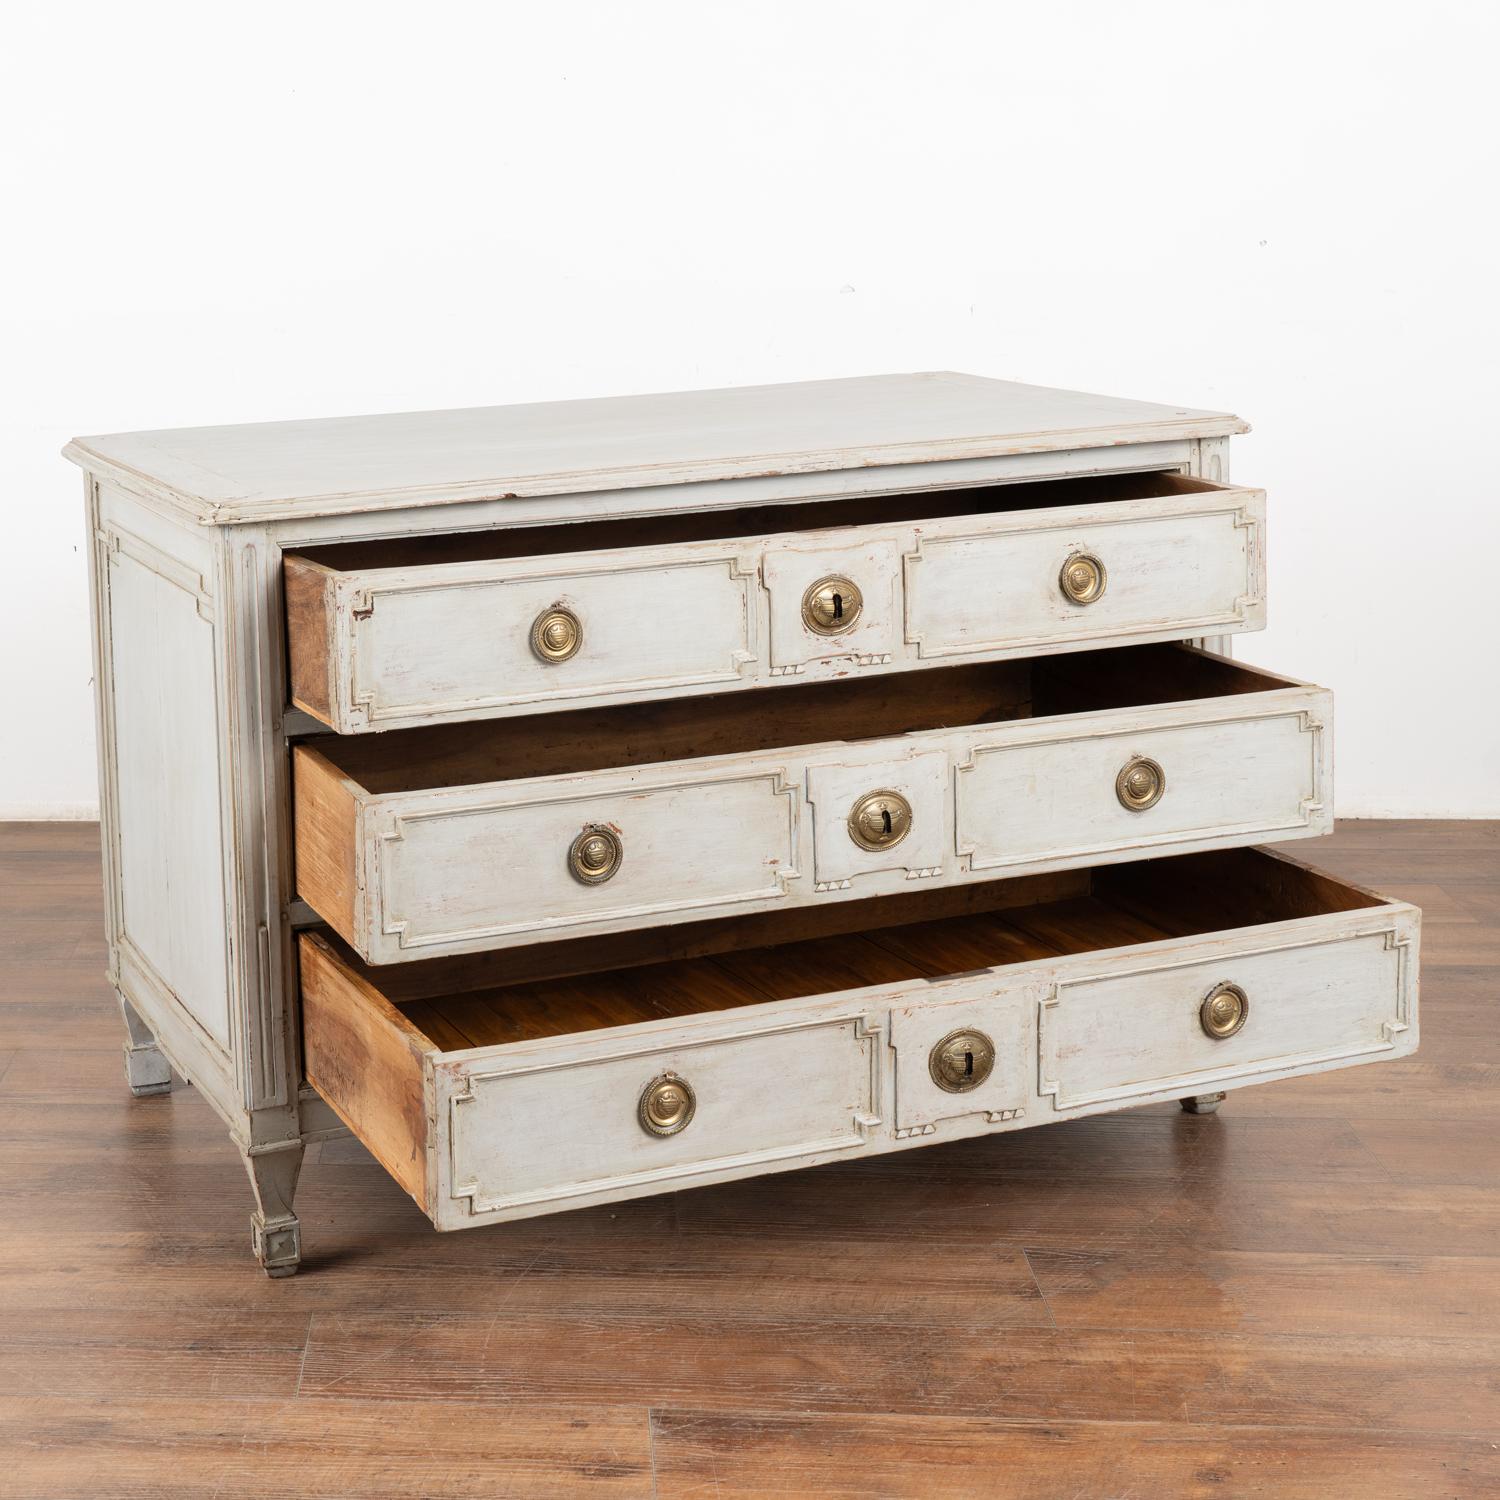 French Provincial Gray Painted Large Chest of Three Drawers, France circa 1820-40 For Sale